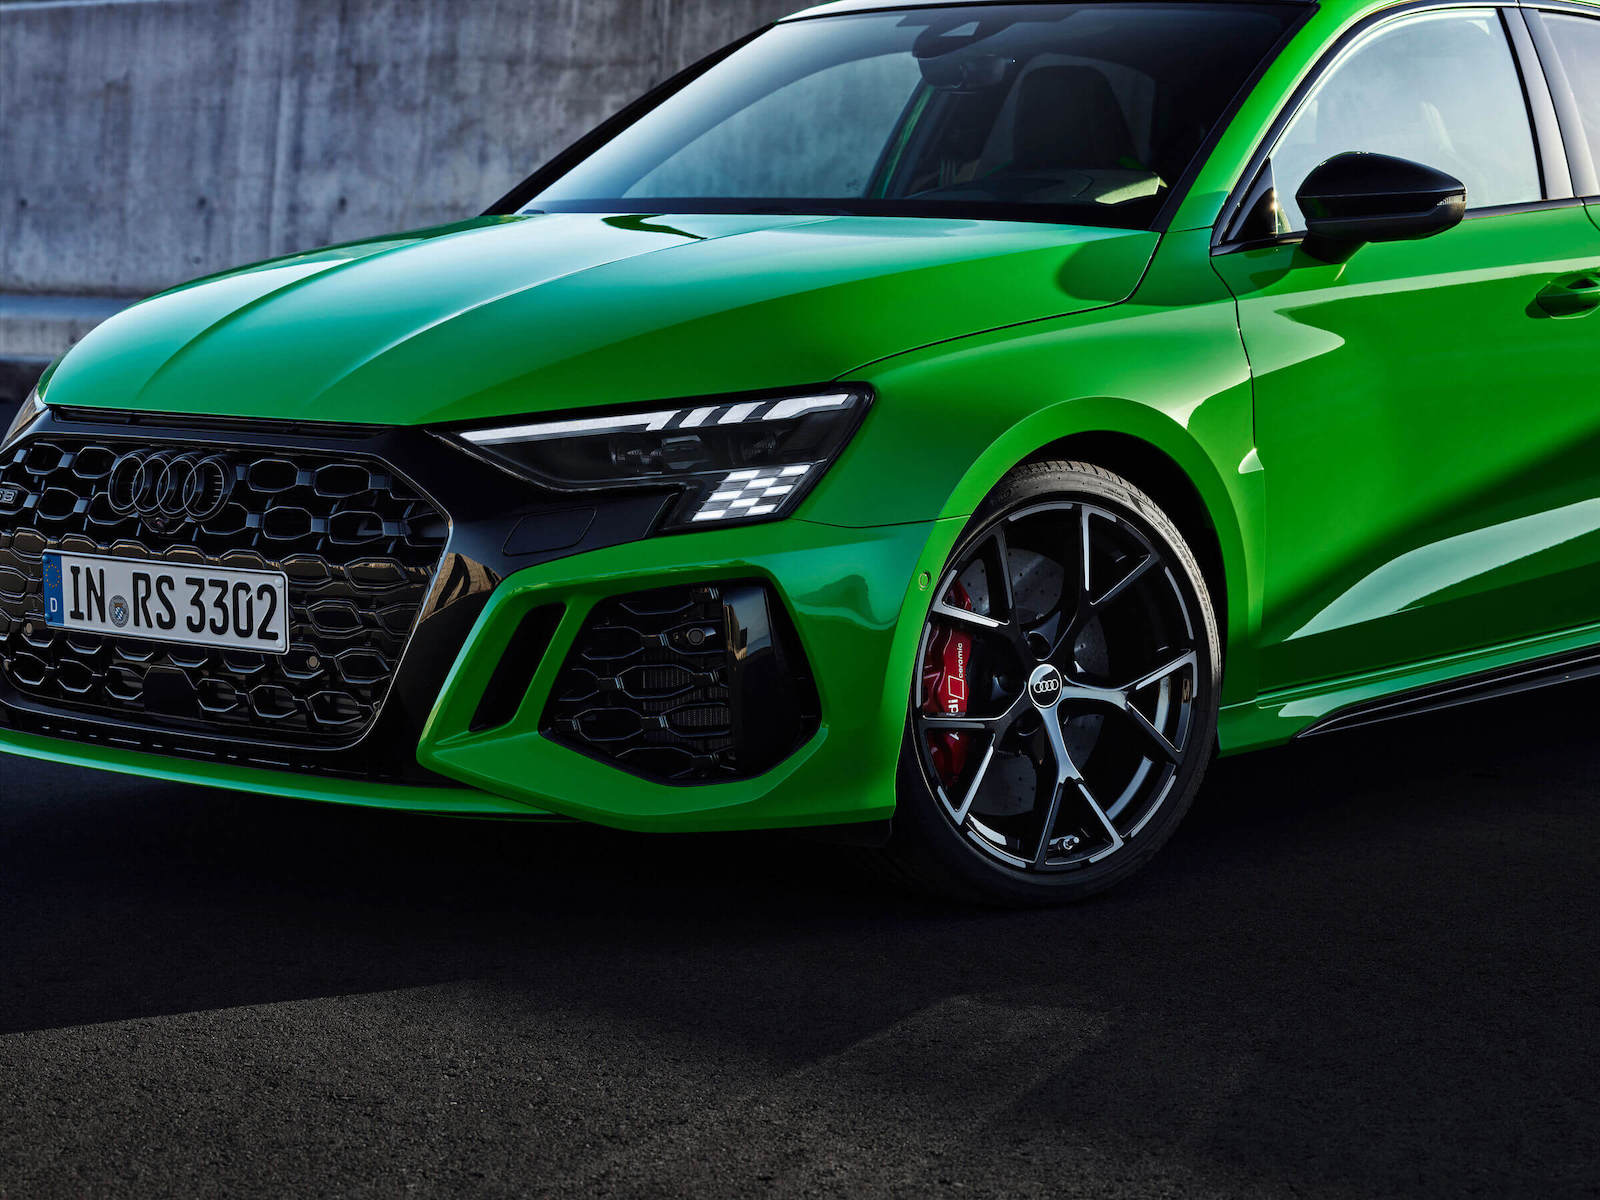 2022 Audi RS 3 with checkered flag headlight design